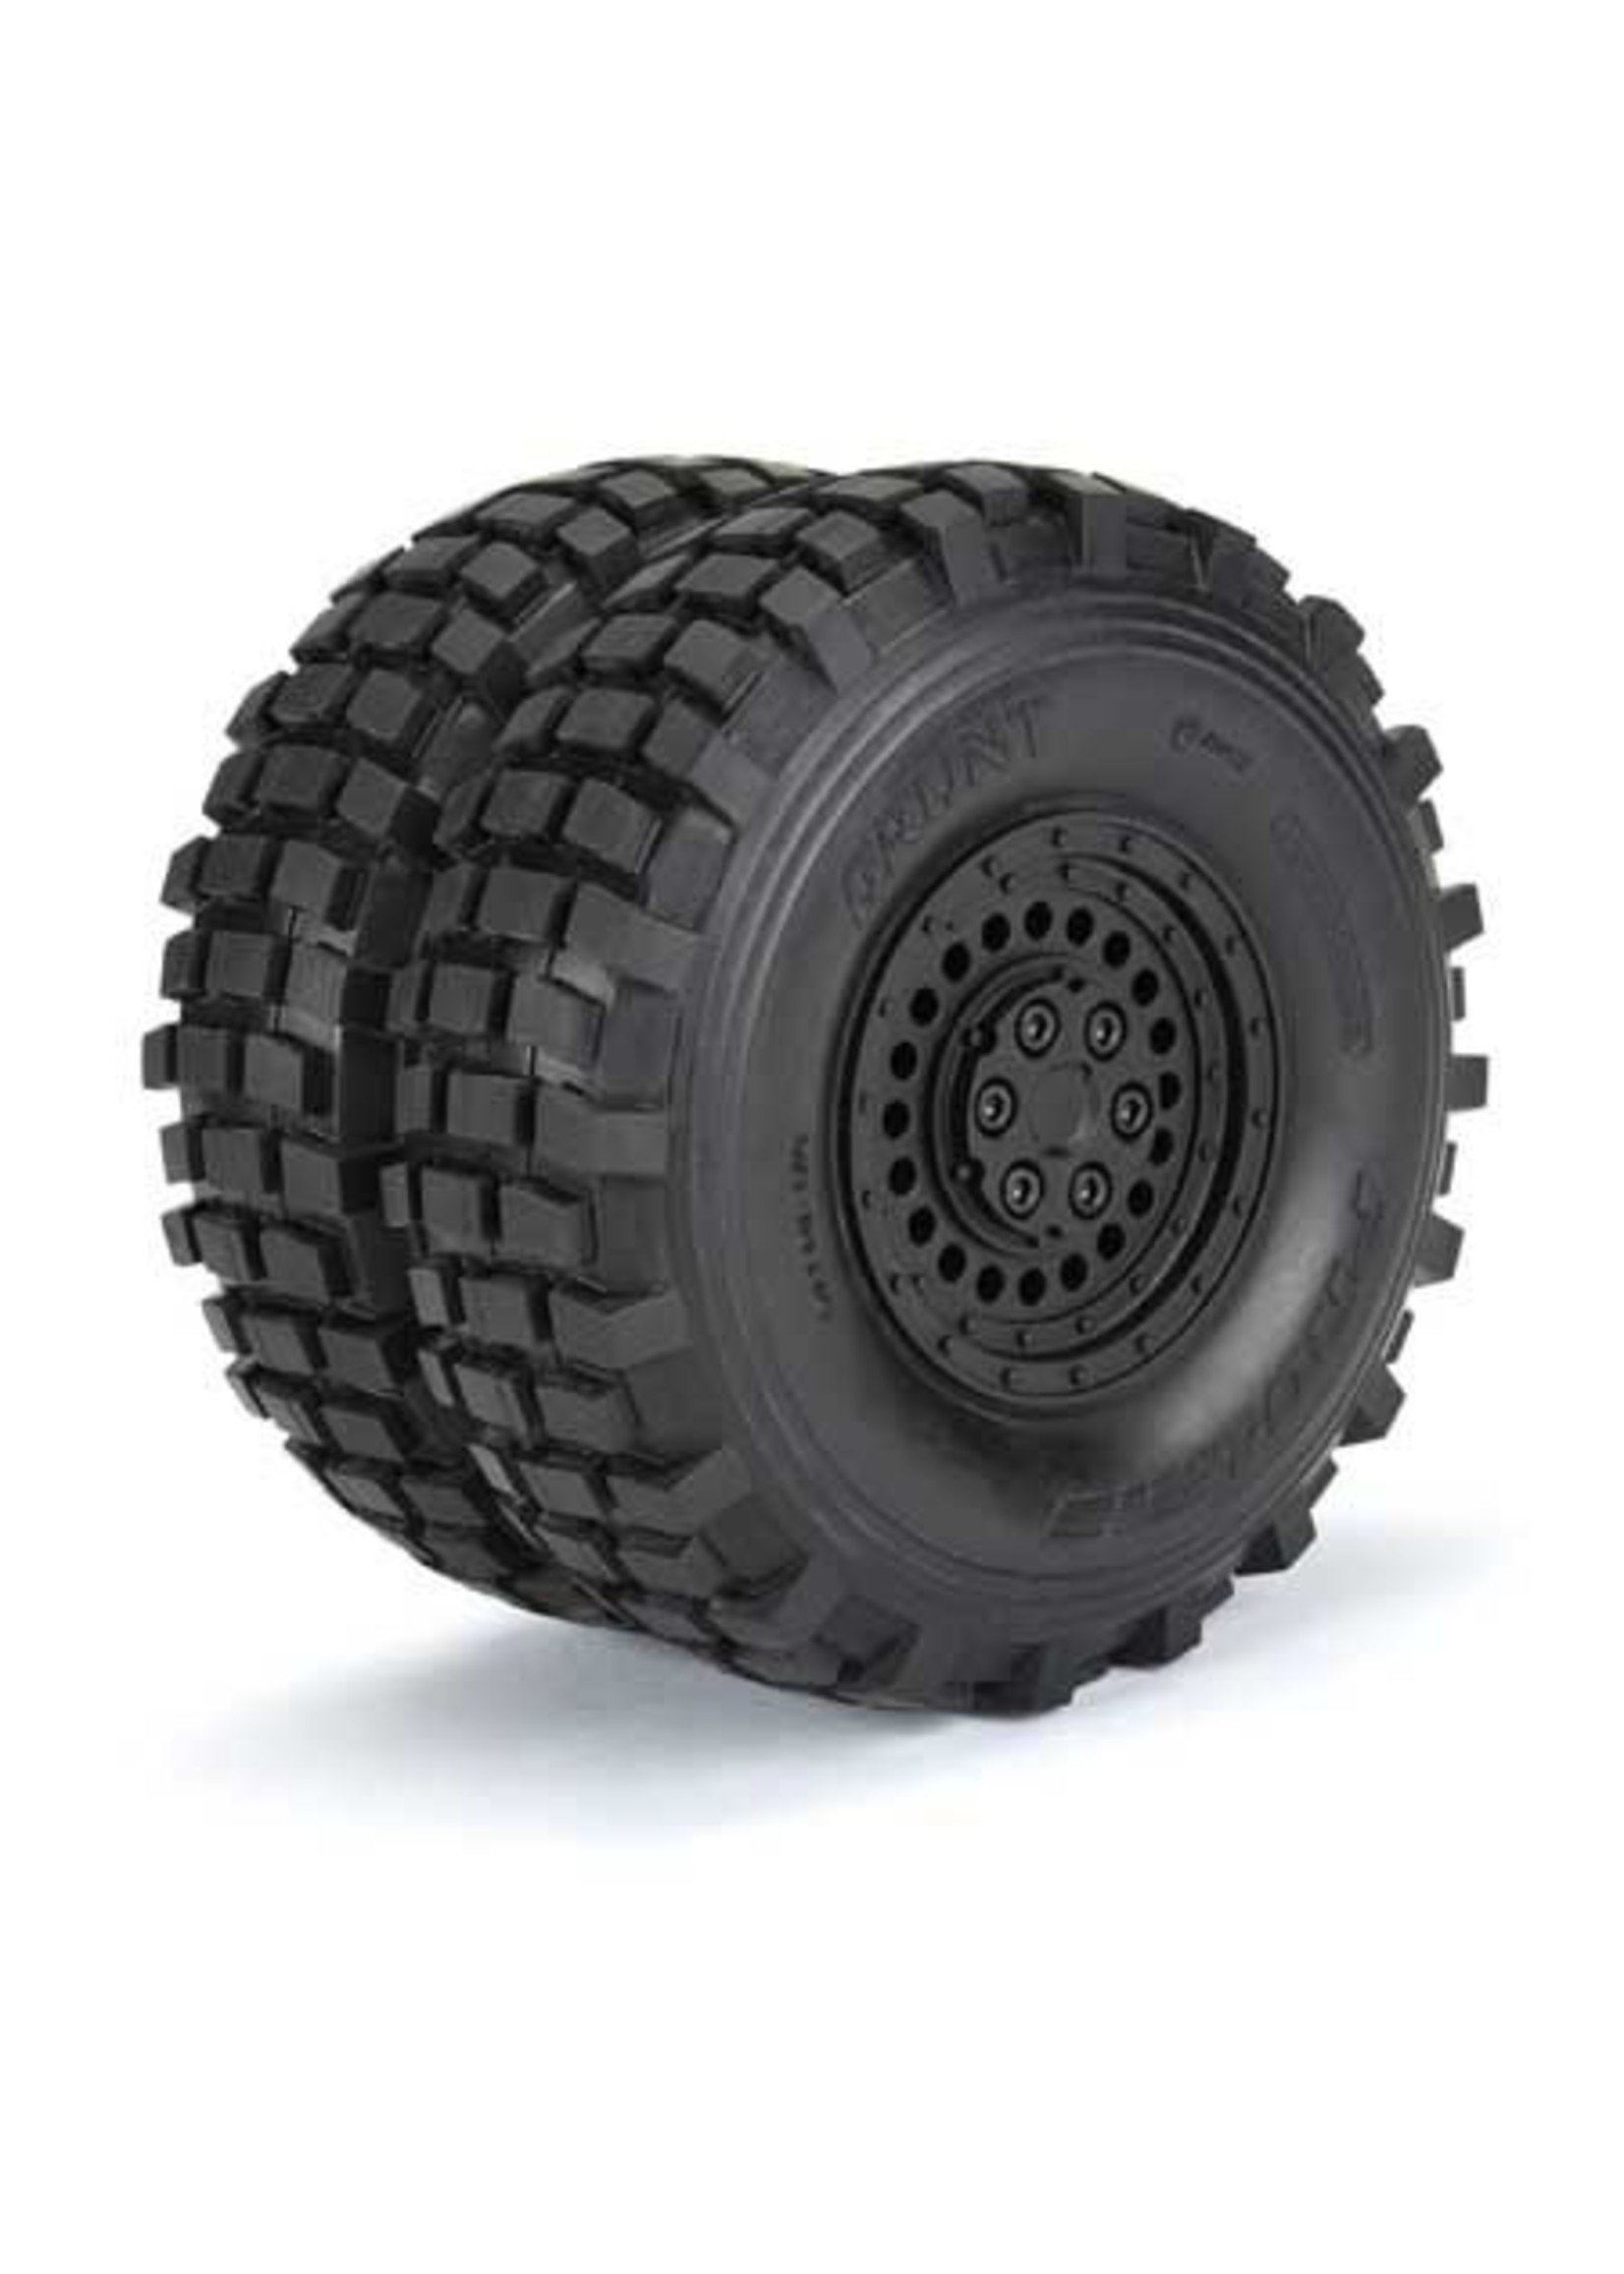 Pro-Line Racing PRO278600 Pro-Line Carbine 1.9" Black Dually Wheels for Crawlers F/R